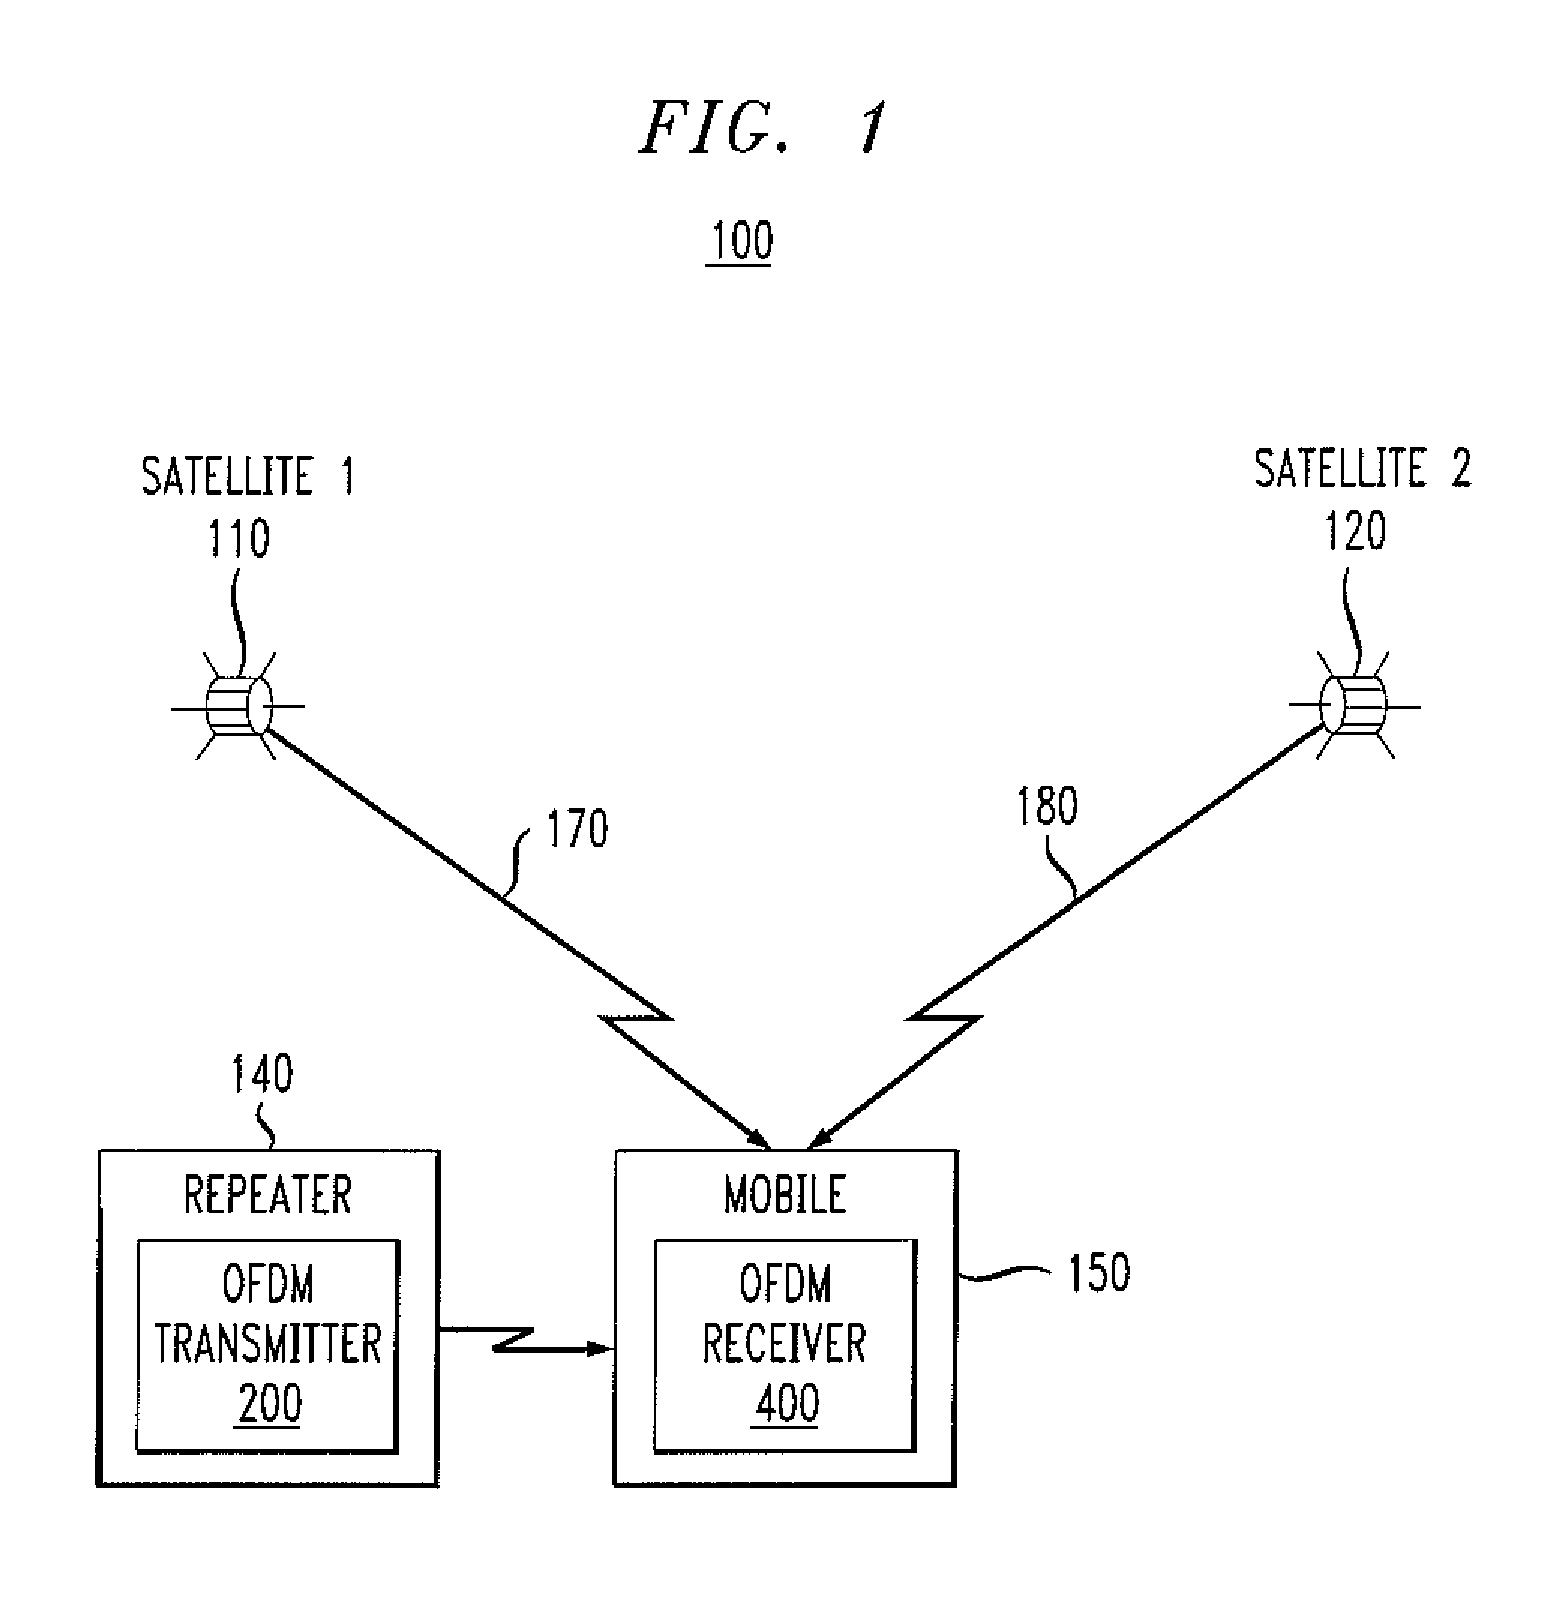 Method and apparatus for performing differential modulation over frequency in an orthogonal frequency division multiplexing (OFDM) communication system